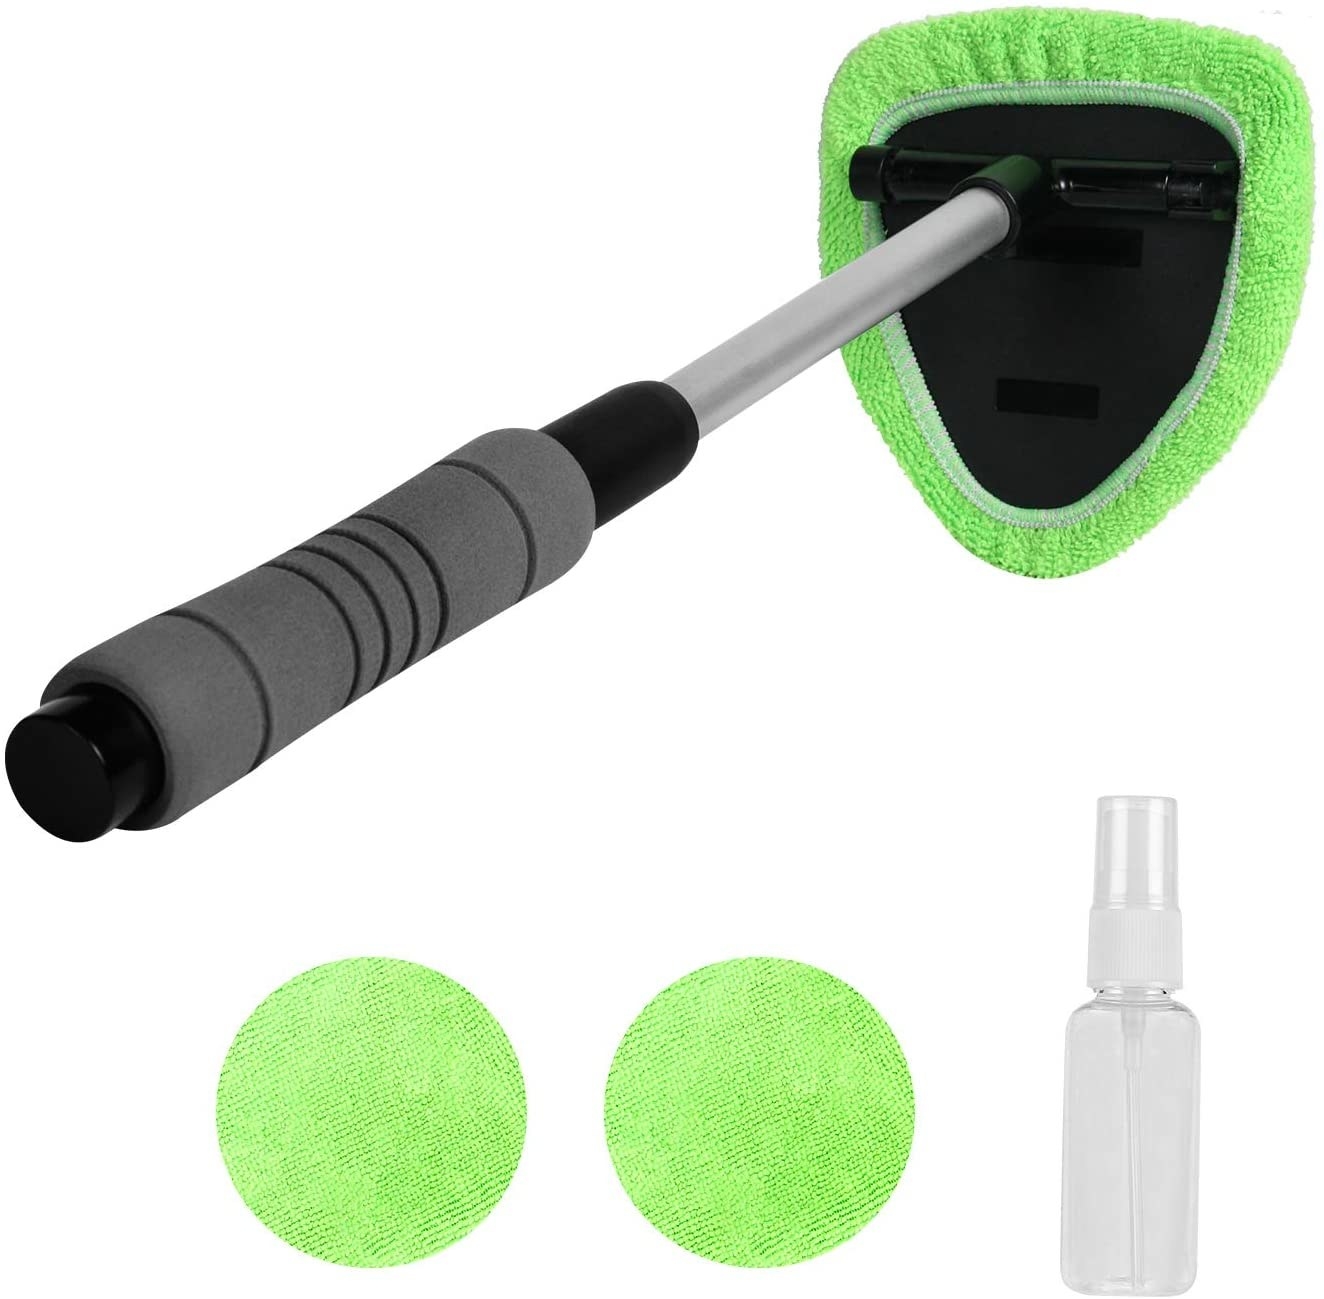 Black cleaning tool with lime green colored pads and clear spray bottle